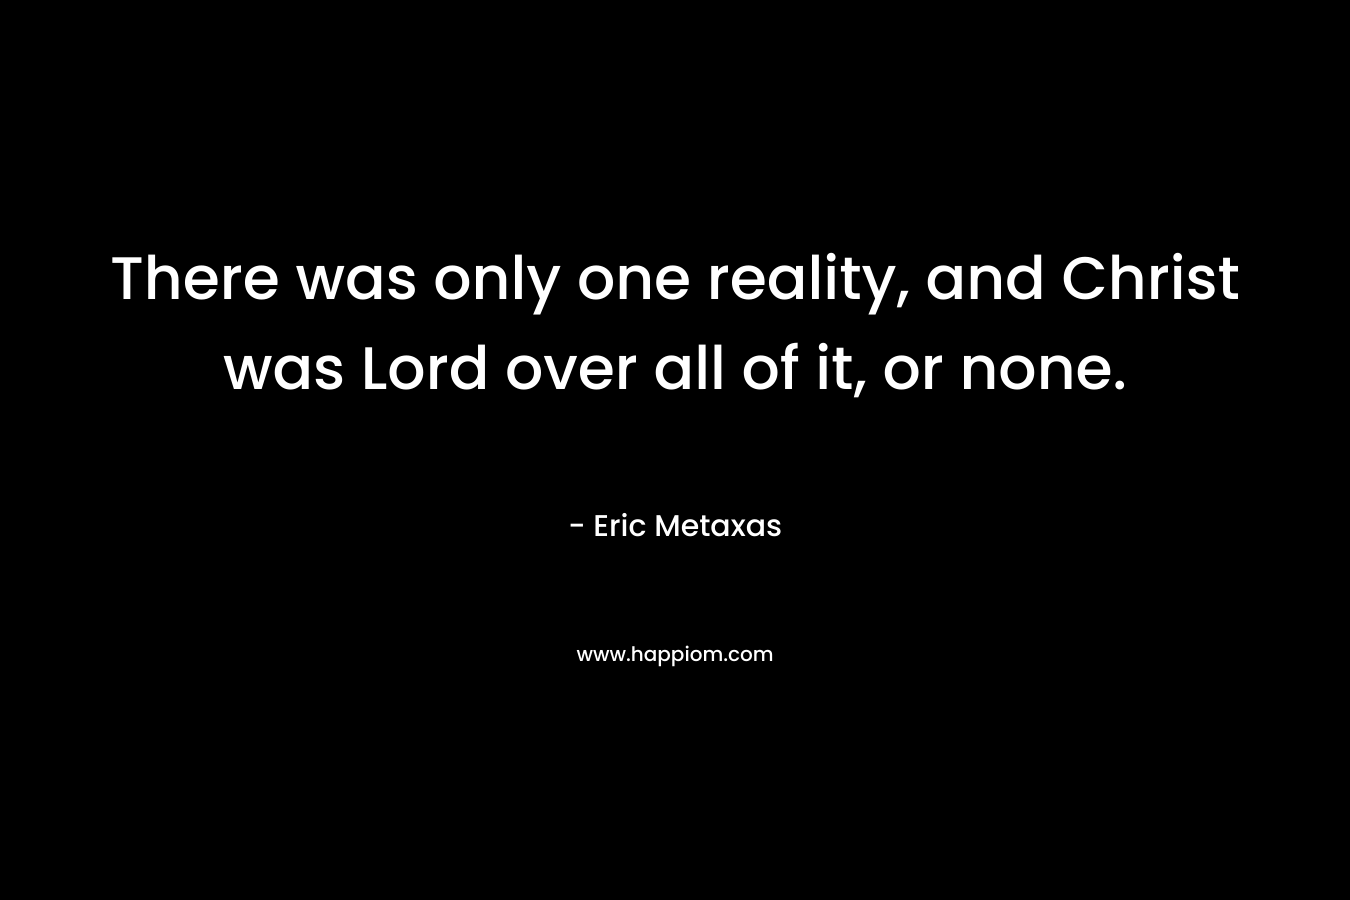 There was only one reality, and Christ was Lord over all of it, or none.